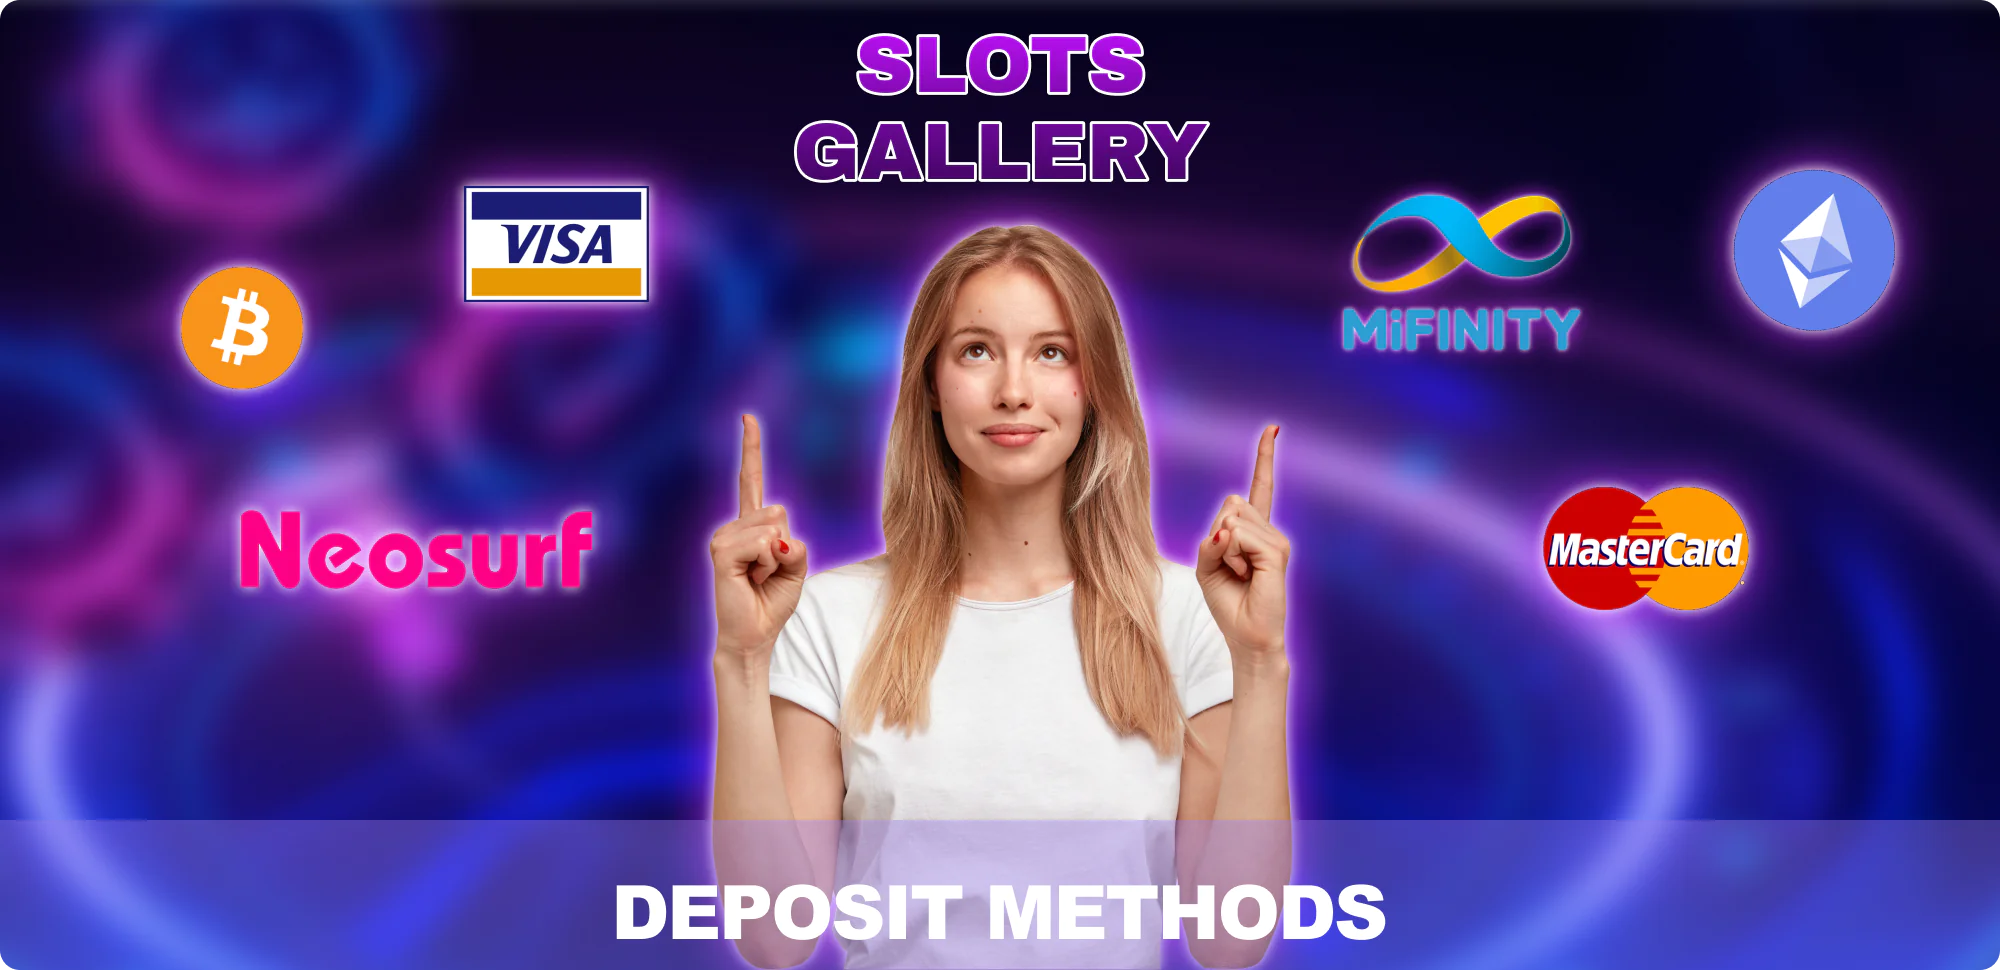 How players can top up their balance at Slots Gallery Casino